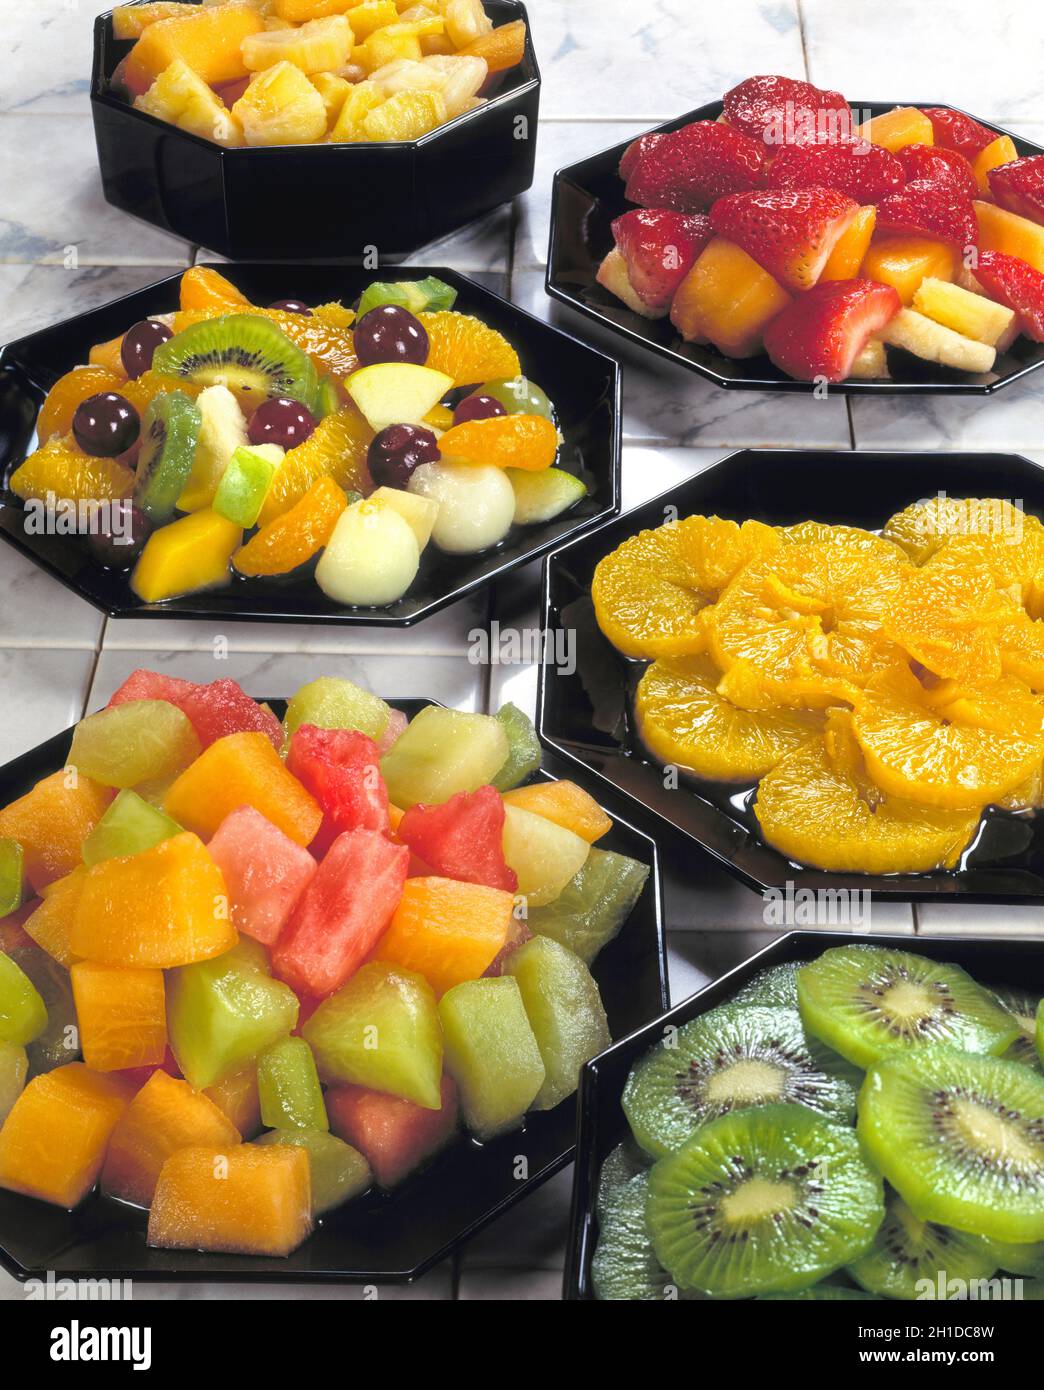 Prepared variety of fruit in black dishes melon cubes oranges kiwi red  strawberries pineapple chunks grapes mango apple white marble tiles background Stock Photo